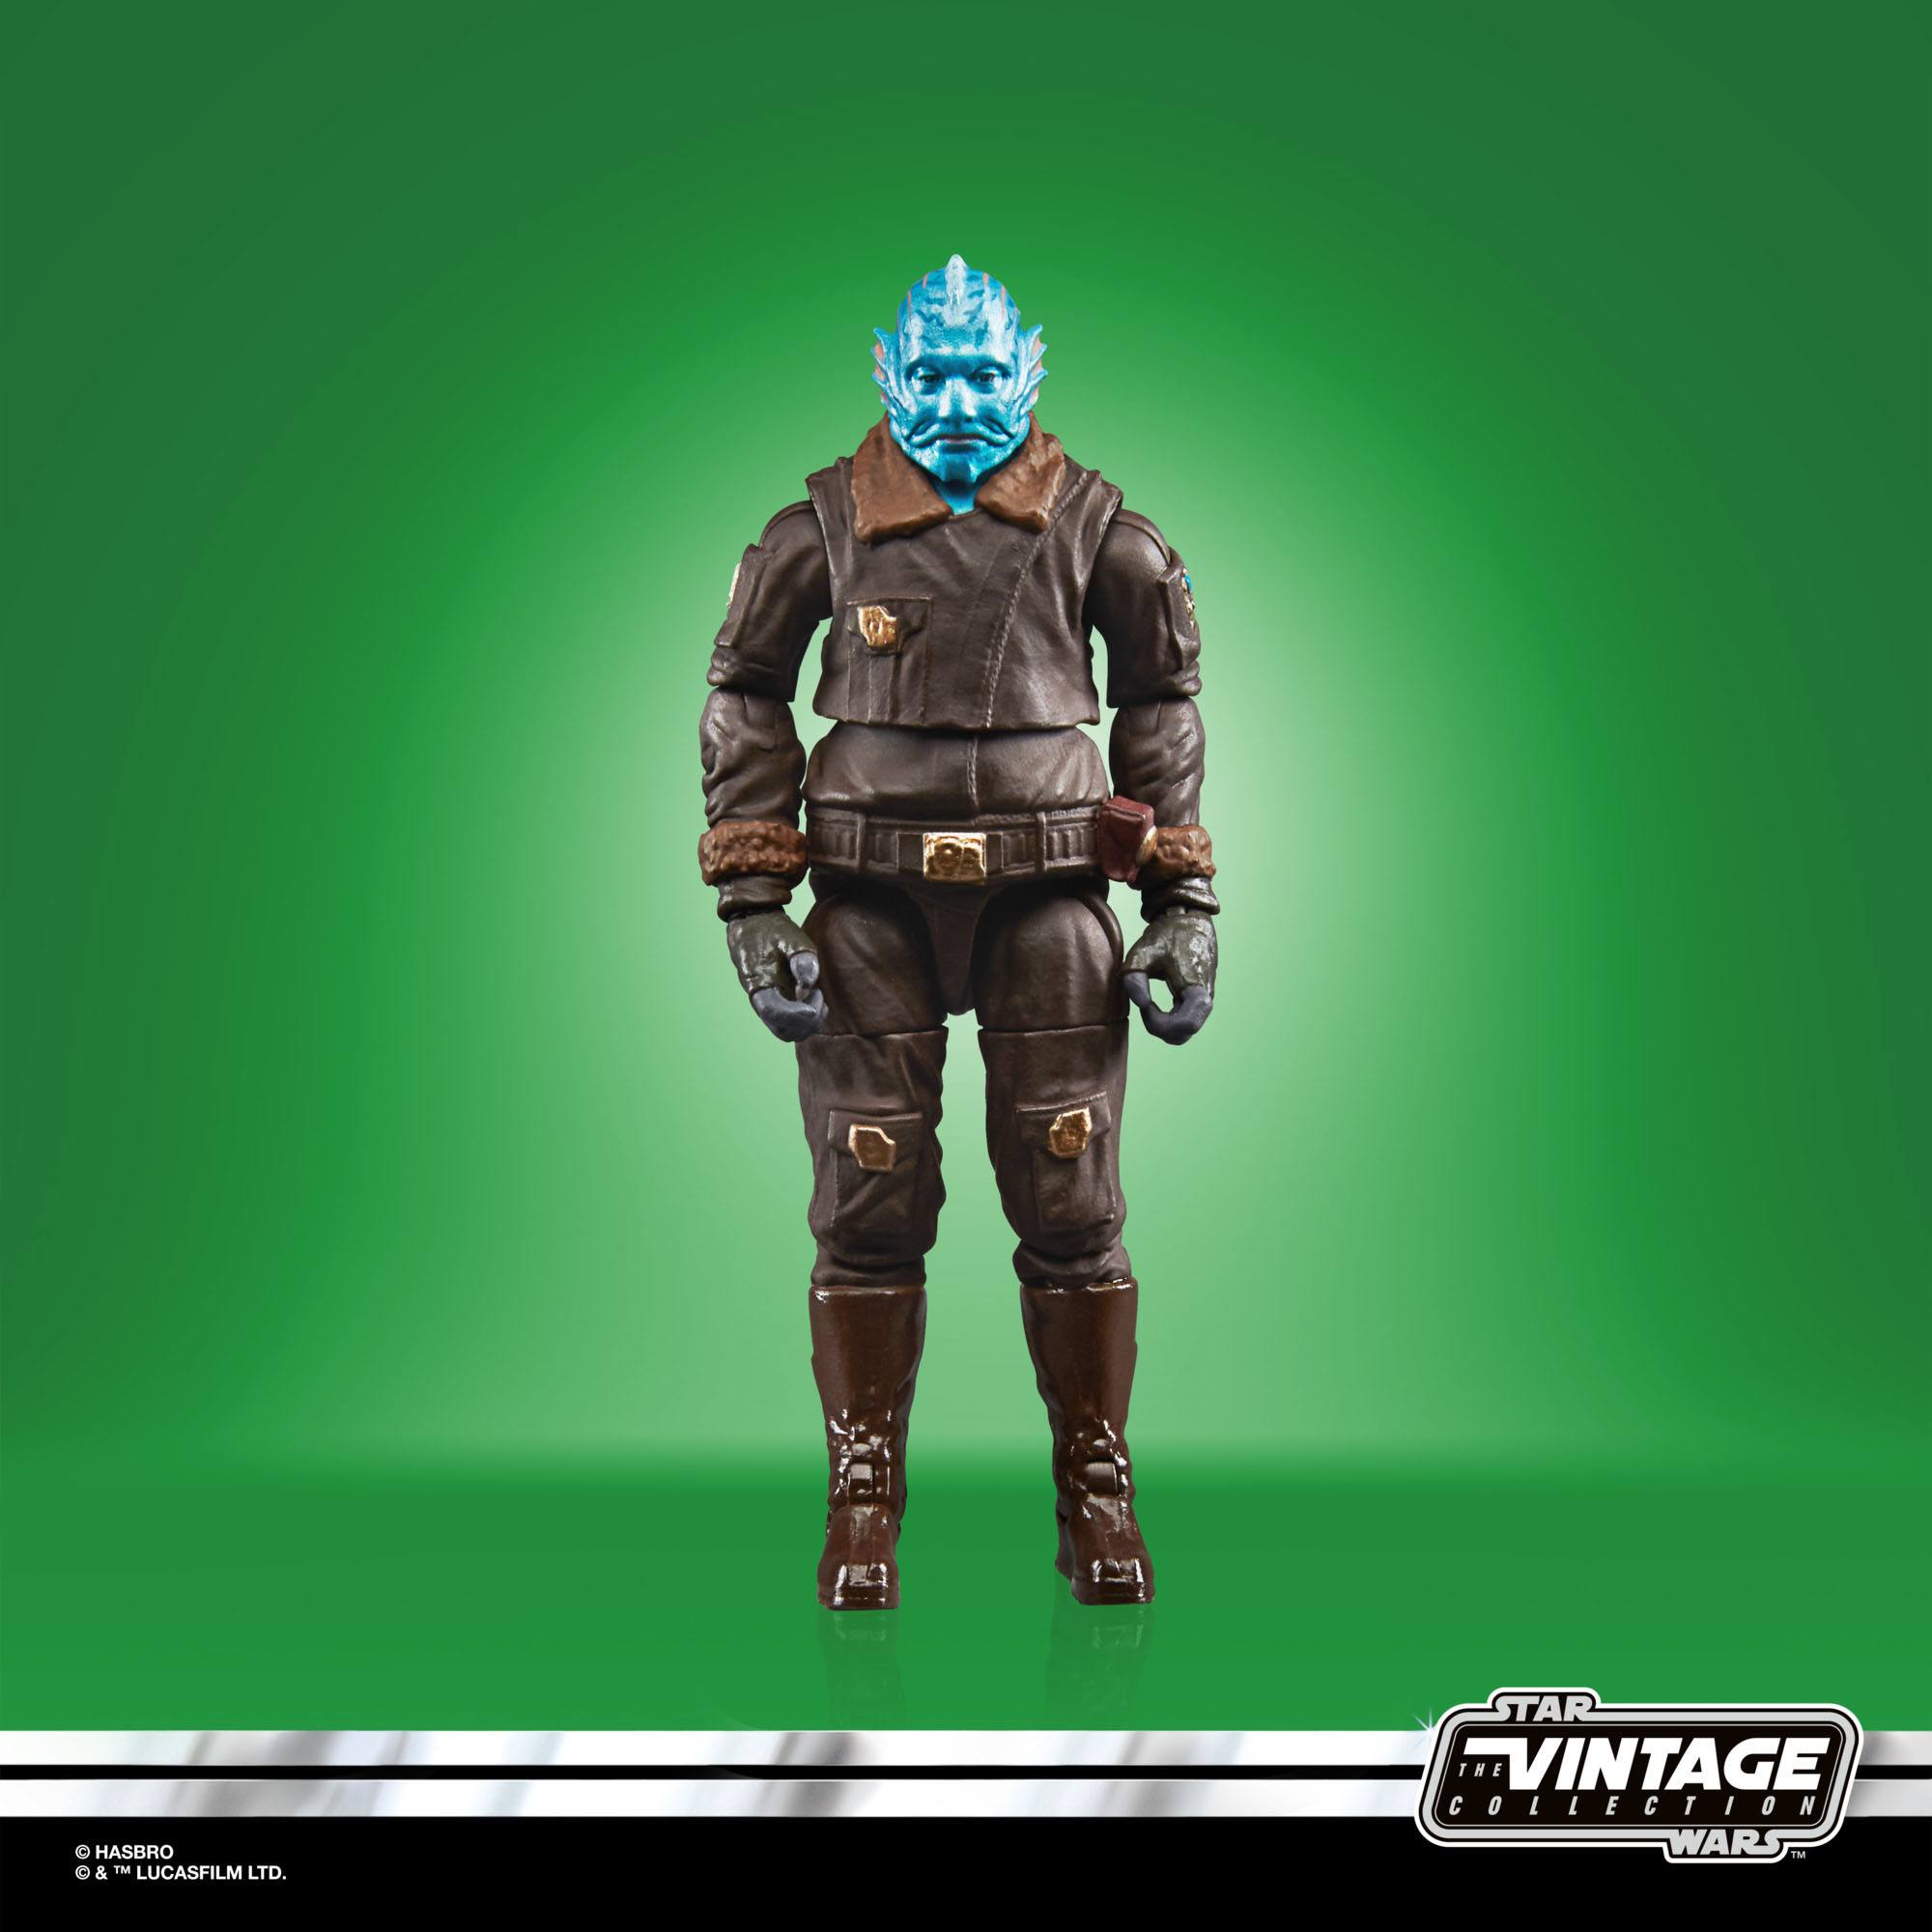 Star Wars The Mandalorian Vintage Collection Actionfigur 2022 The Mythrol 10 cm HASF4464 5010993958016